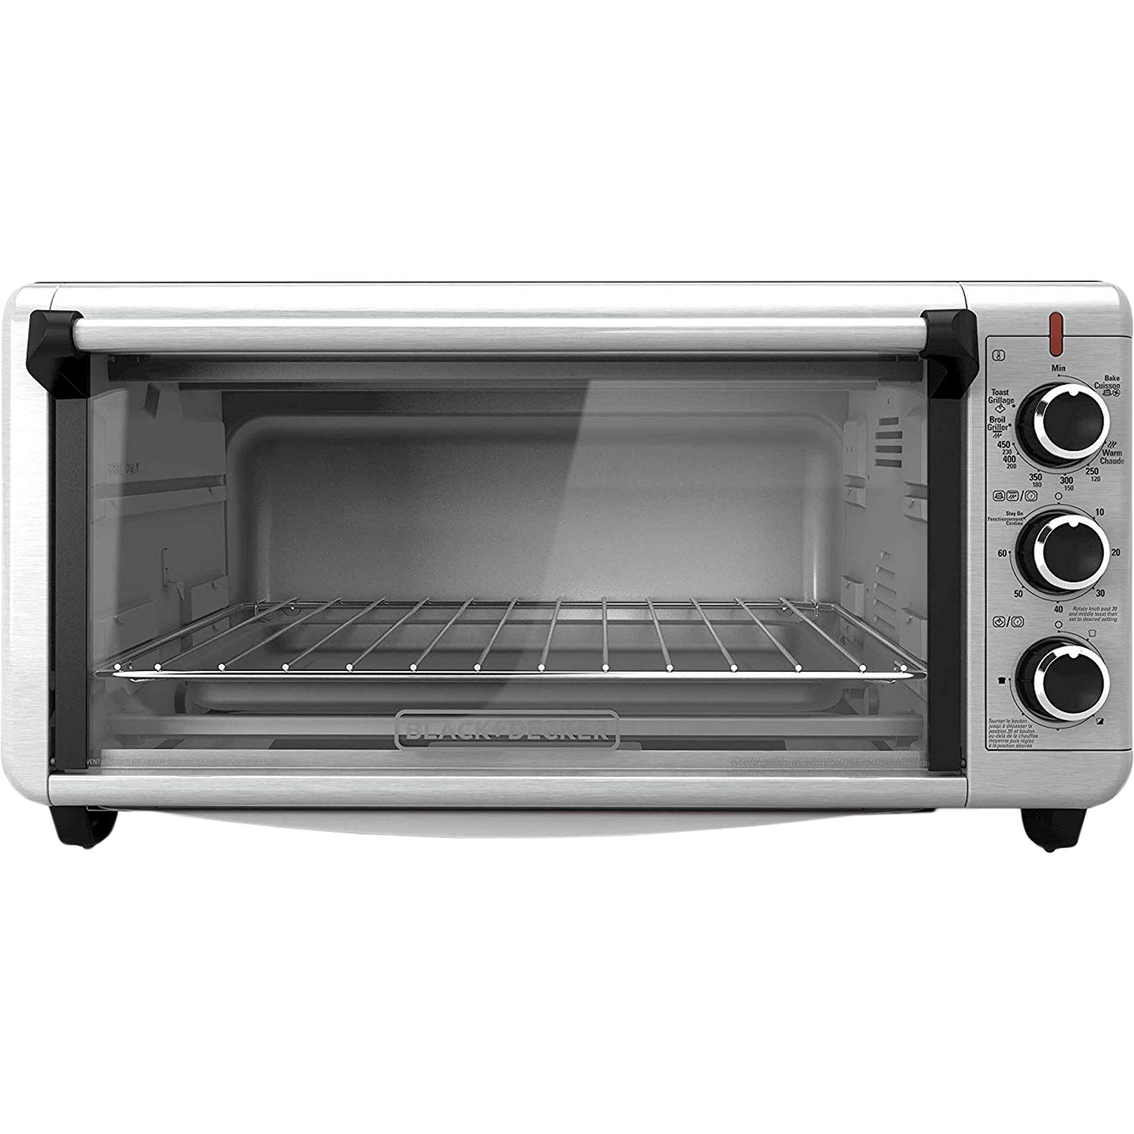 Black + Decker Extra Wide Toaster Oven - Image 2 of 4